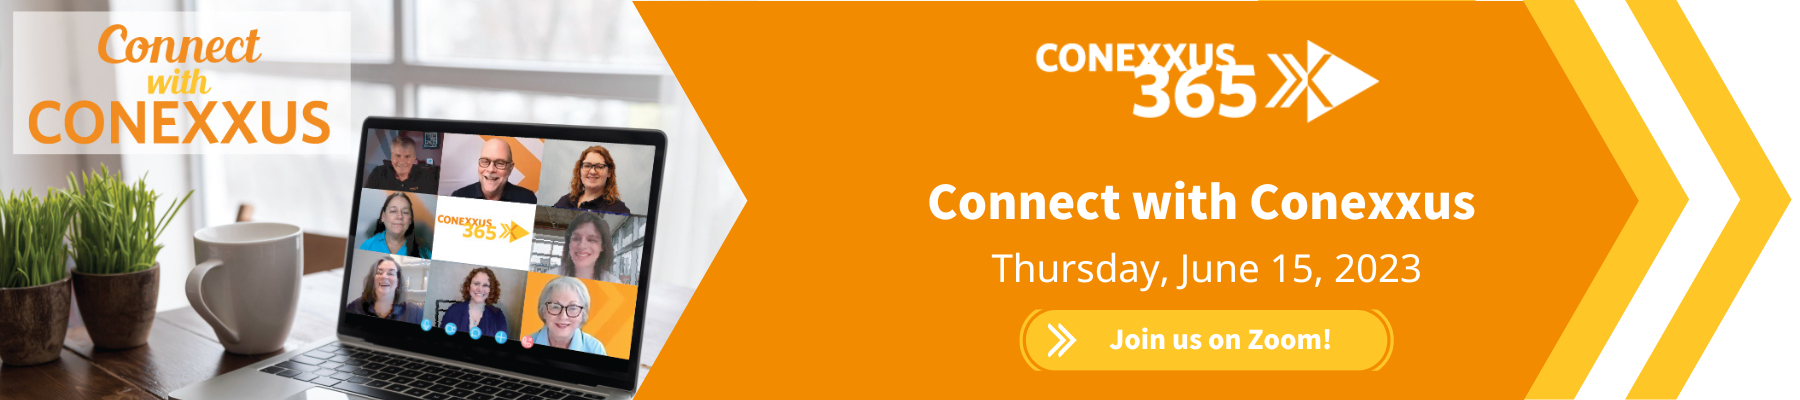 Connect with Conexxus - June